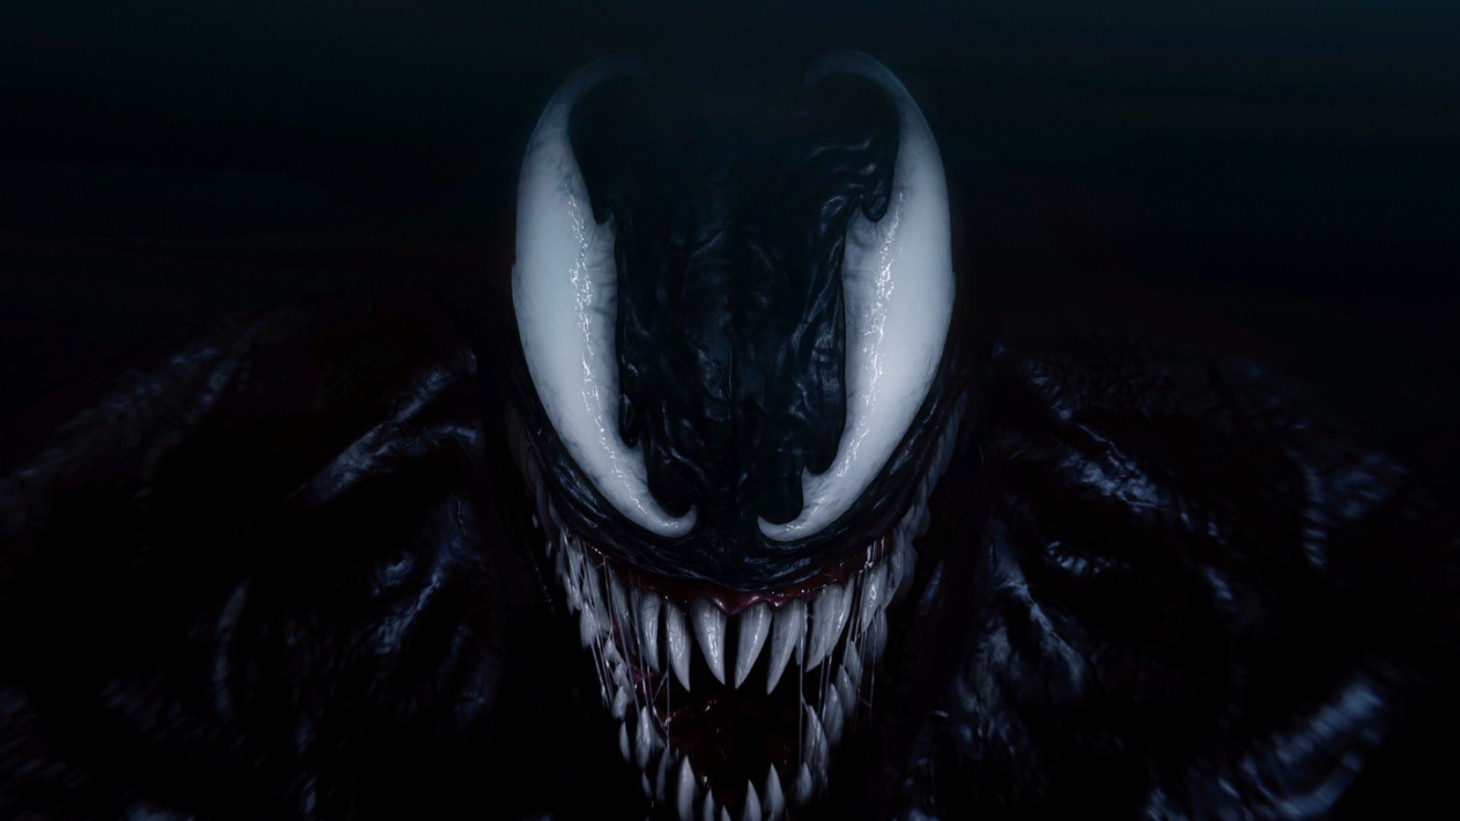 Tony Todd, the Venom voice actor, hinted that Spider-Man 2 would be  released in September